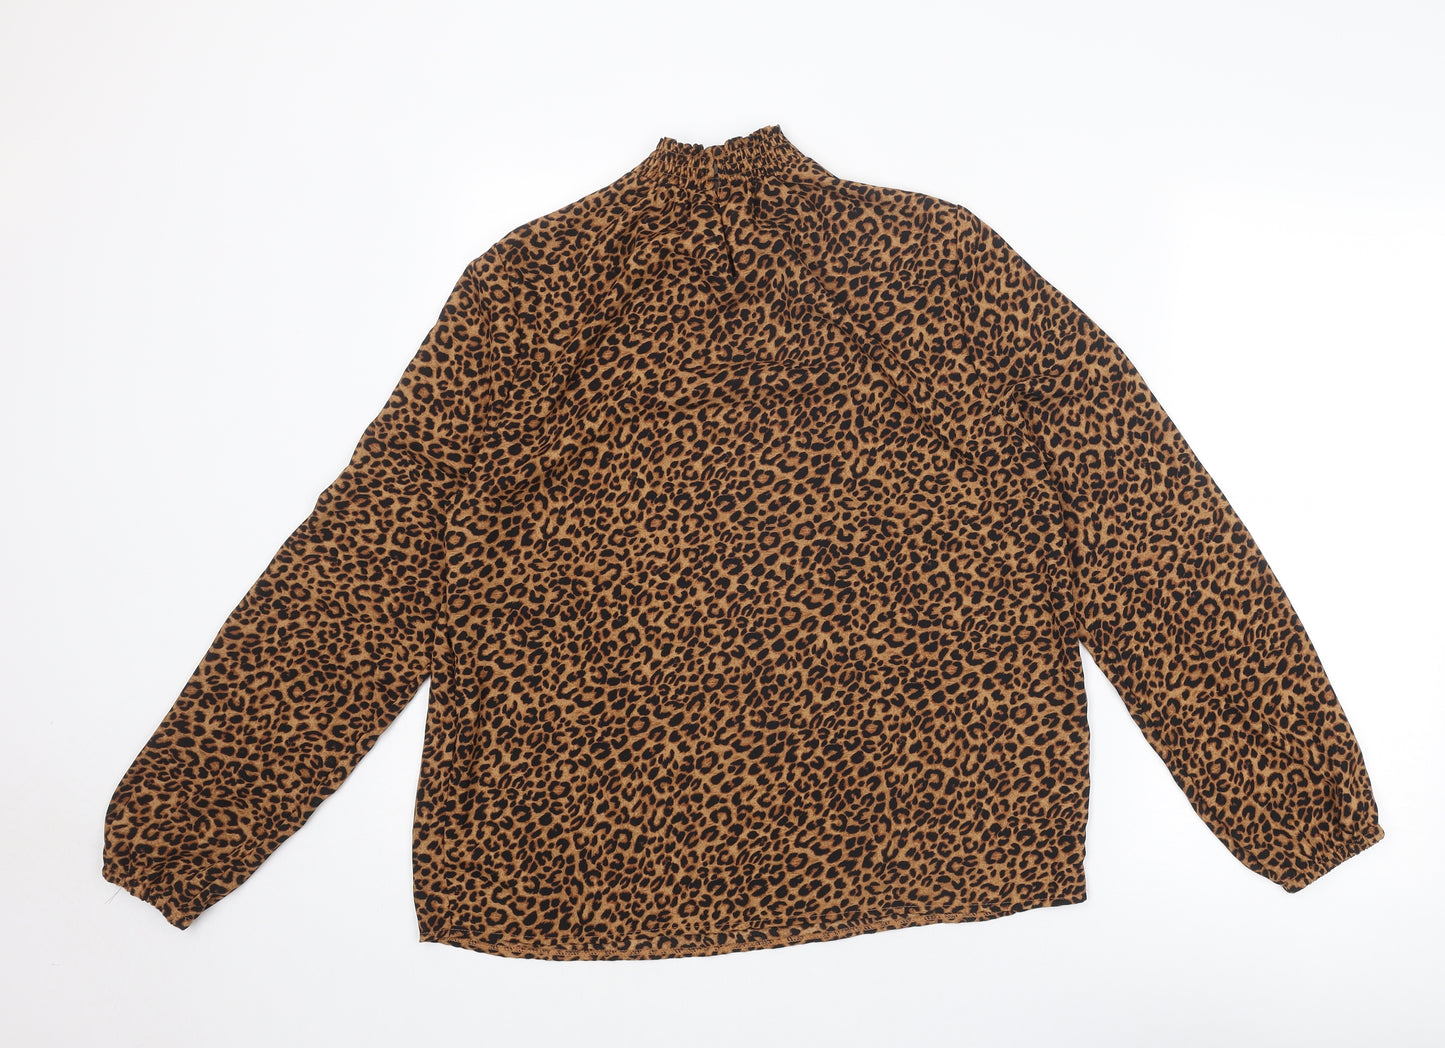 New Look Womens Brown Animal Print Polyester Basic Blouse Size 12 Mock Neck - Leopard Print